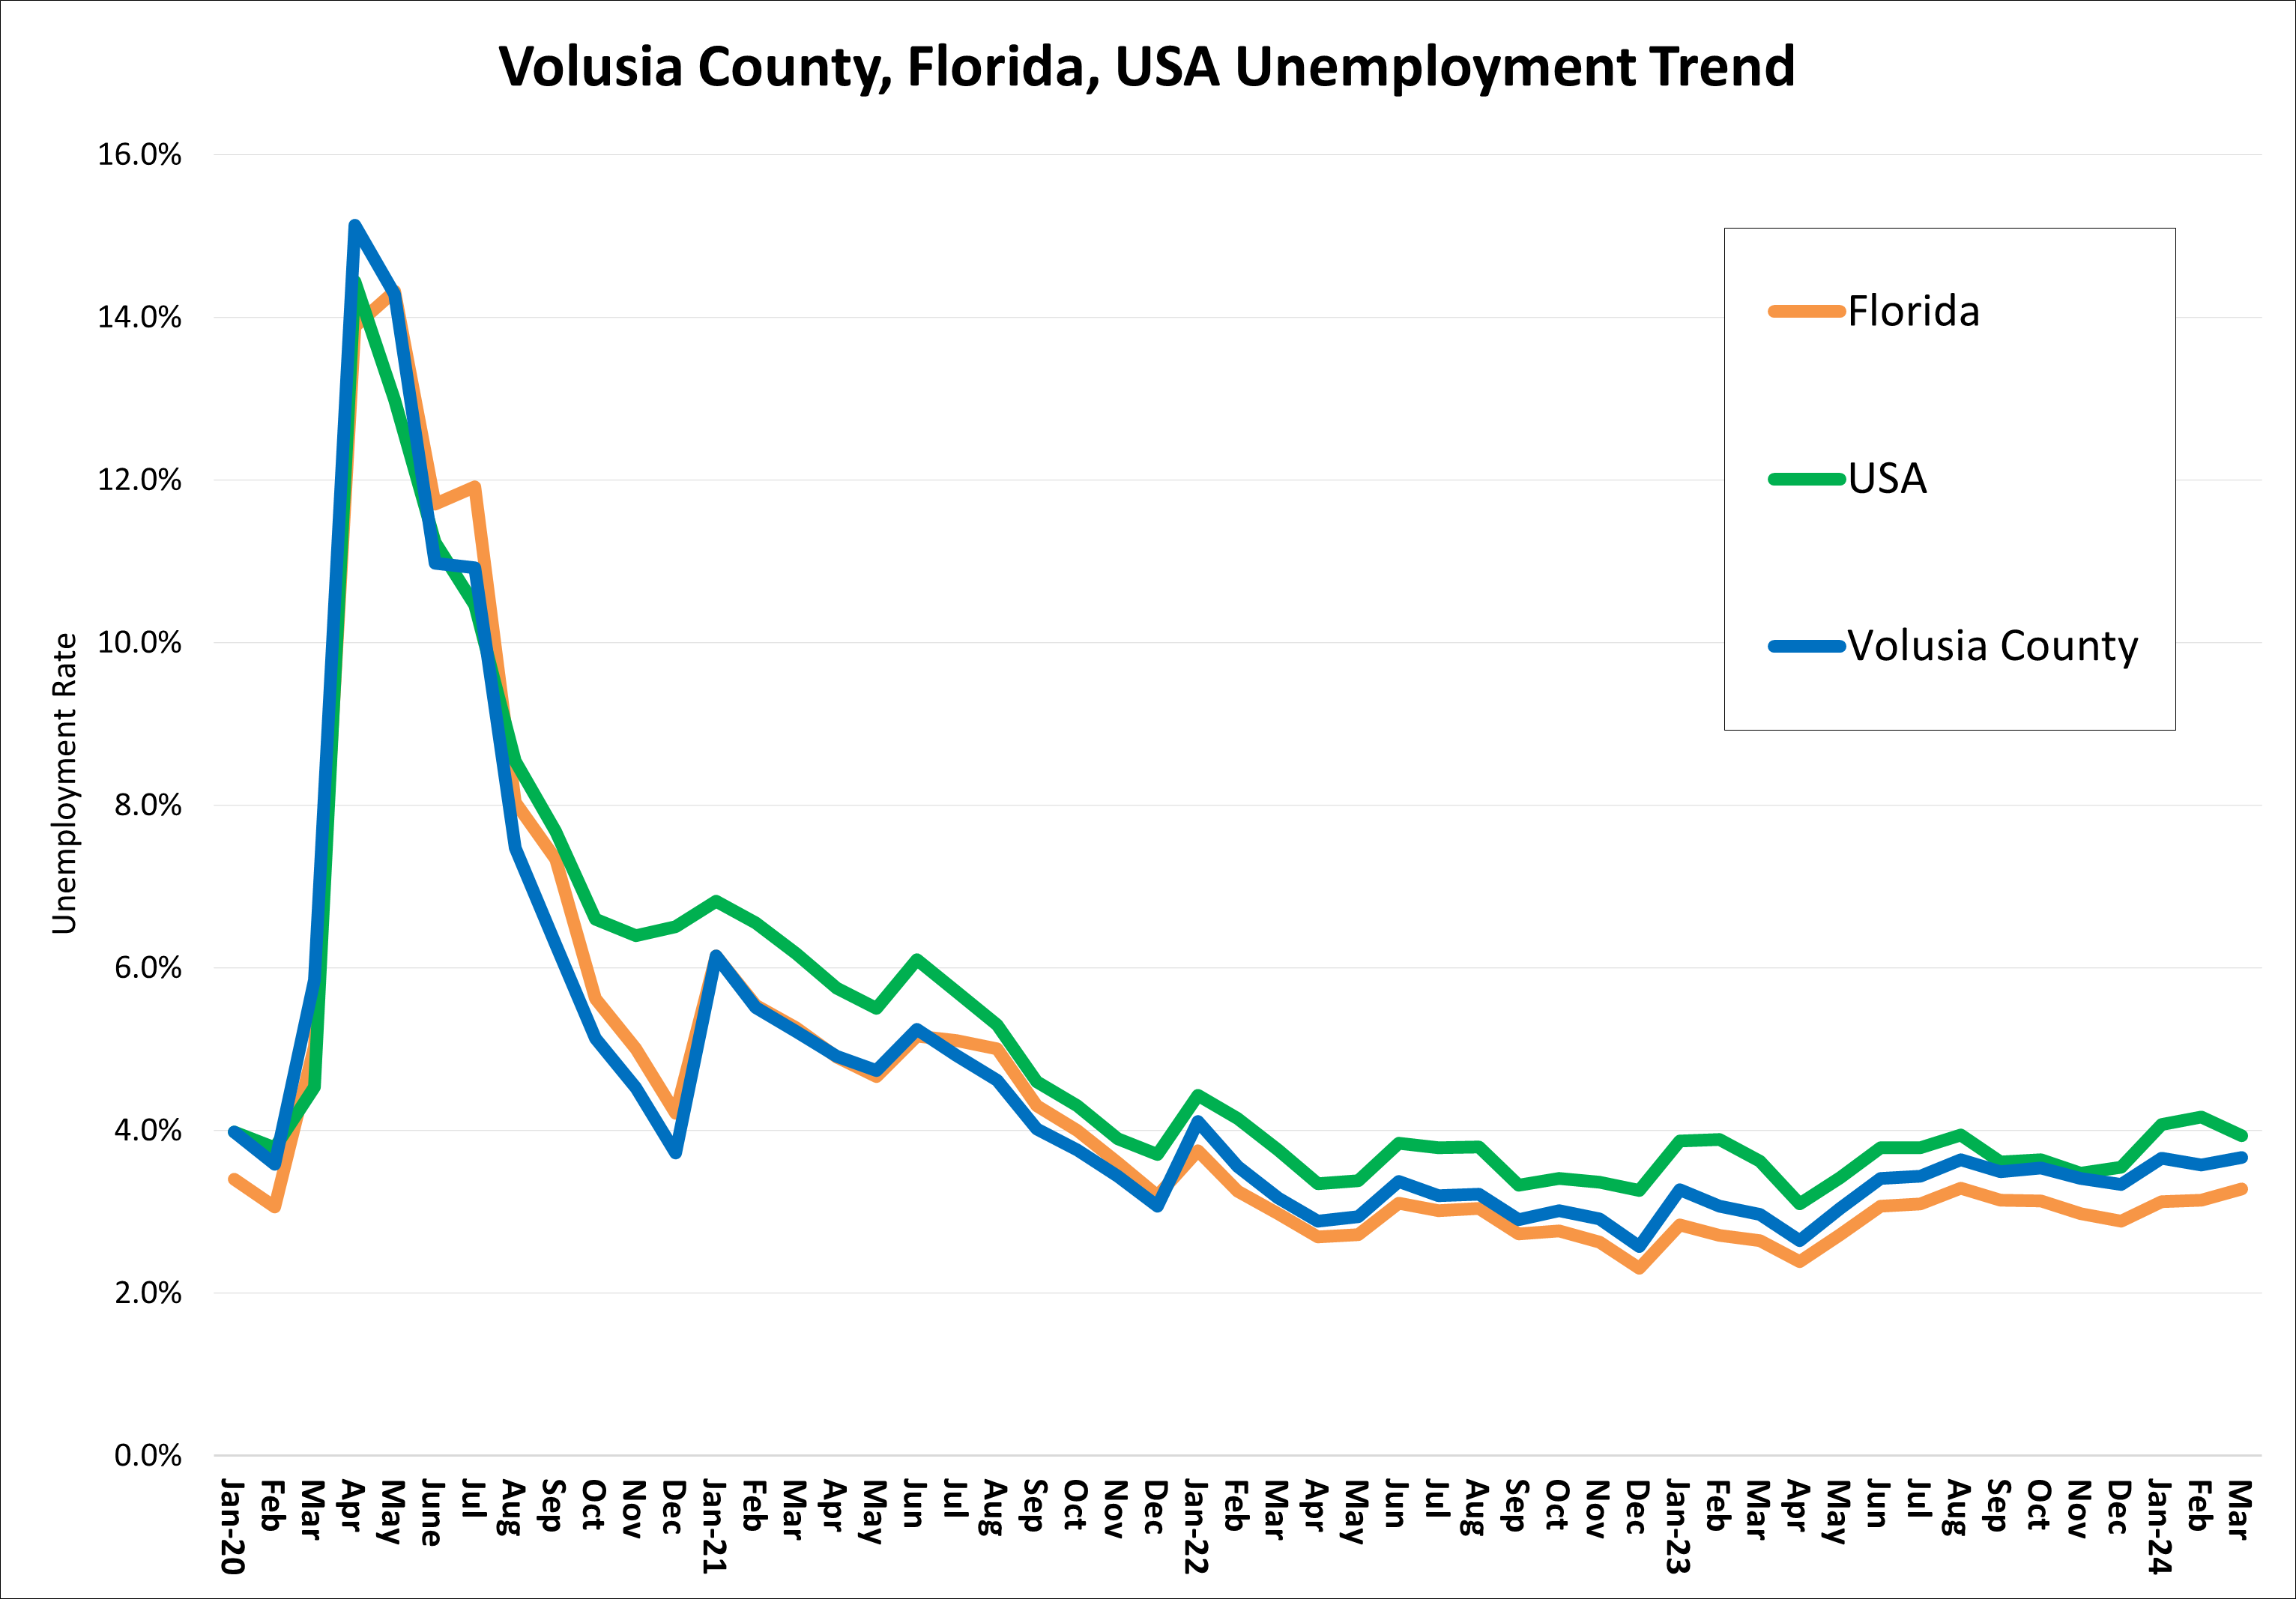 The chart shows the unemployment rate trend for Volusia County, Florida, and the US from January 2020 to present. After the impact of COVID and an initial rate of 15.1%, Volusia County's unemployment rate had a steady decrease throughout 2021 and 2022. The current rate was 3.6% as of Feb. 2024 and has consistently been lower than the national unemployment rate. Florida's unemployment rate is 3.1% and the US is 4.2%.